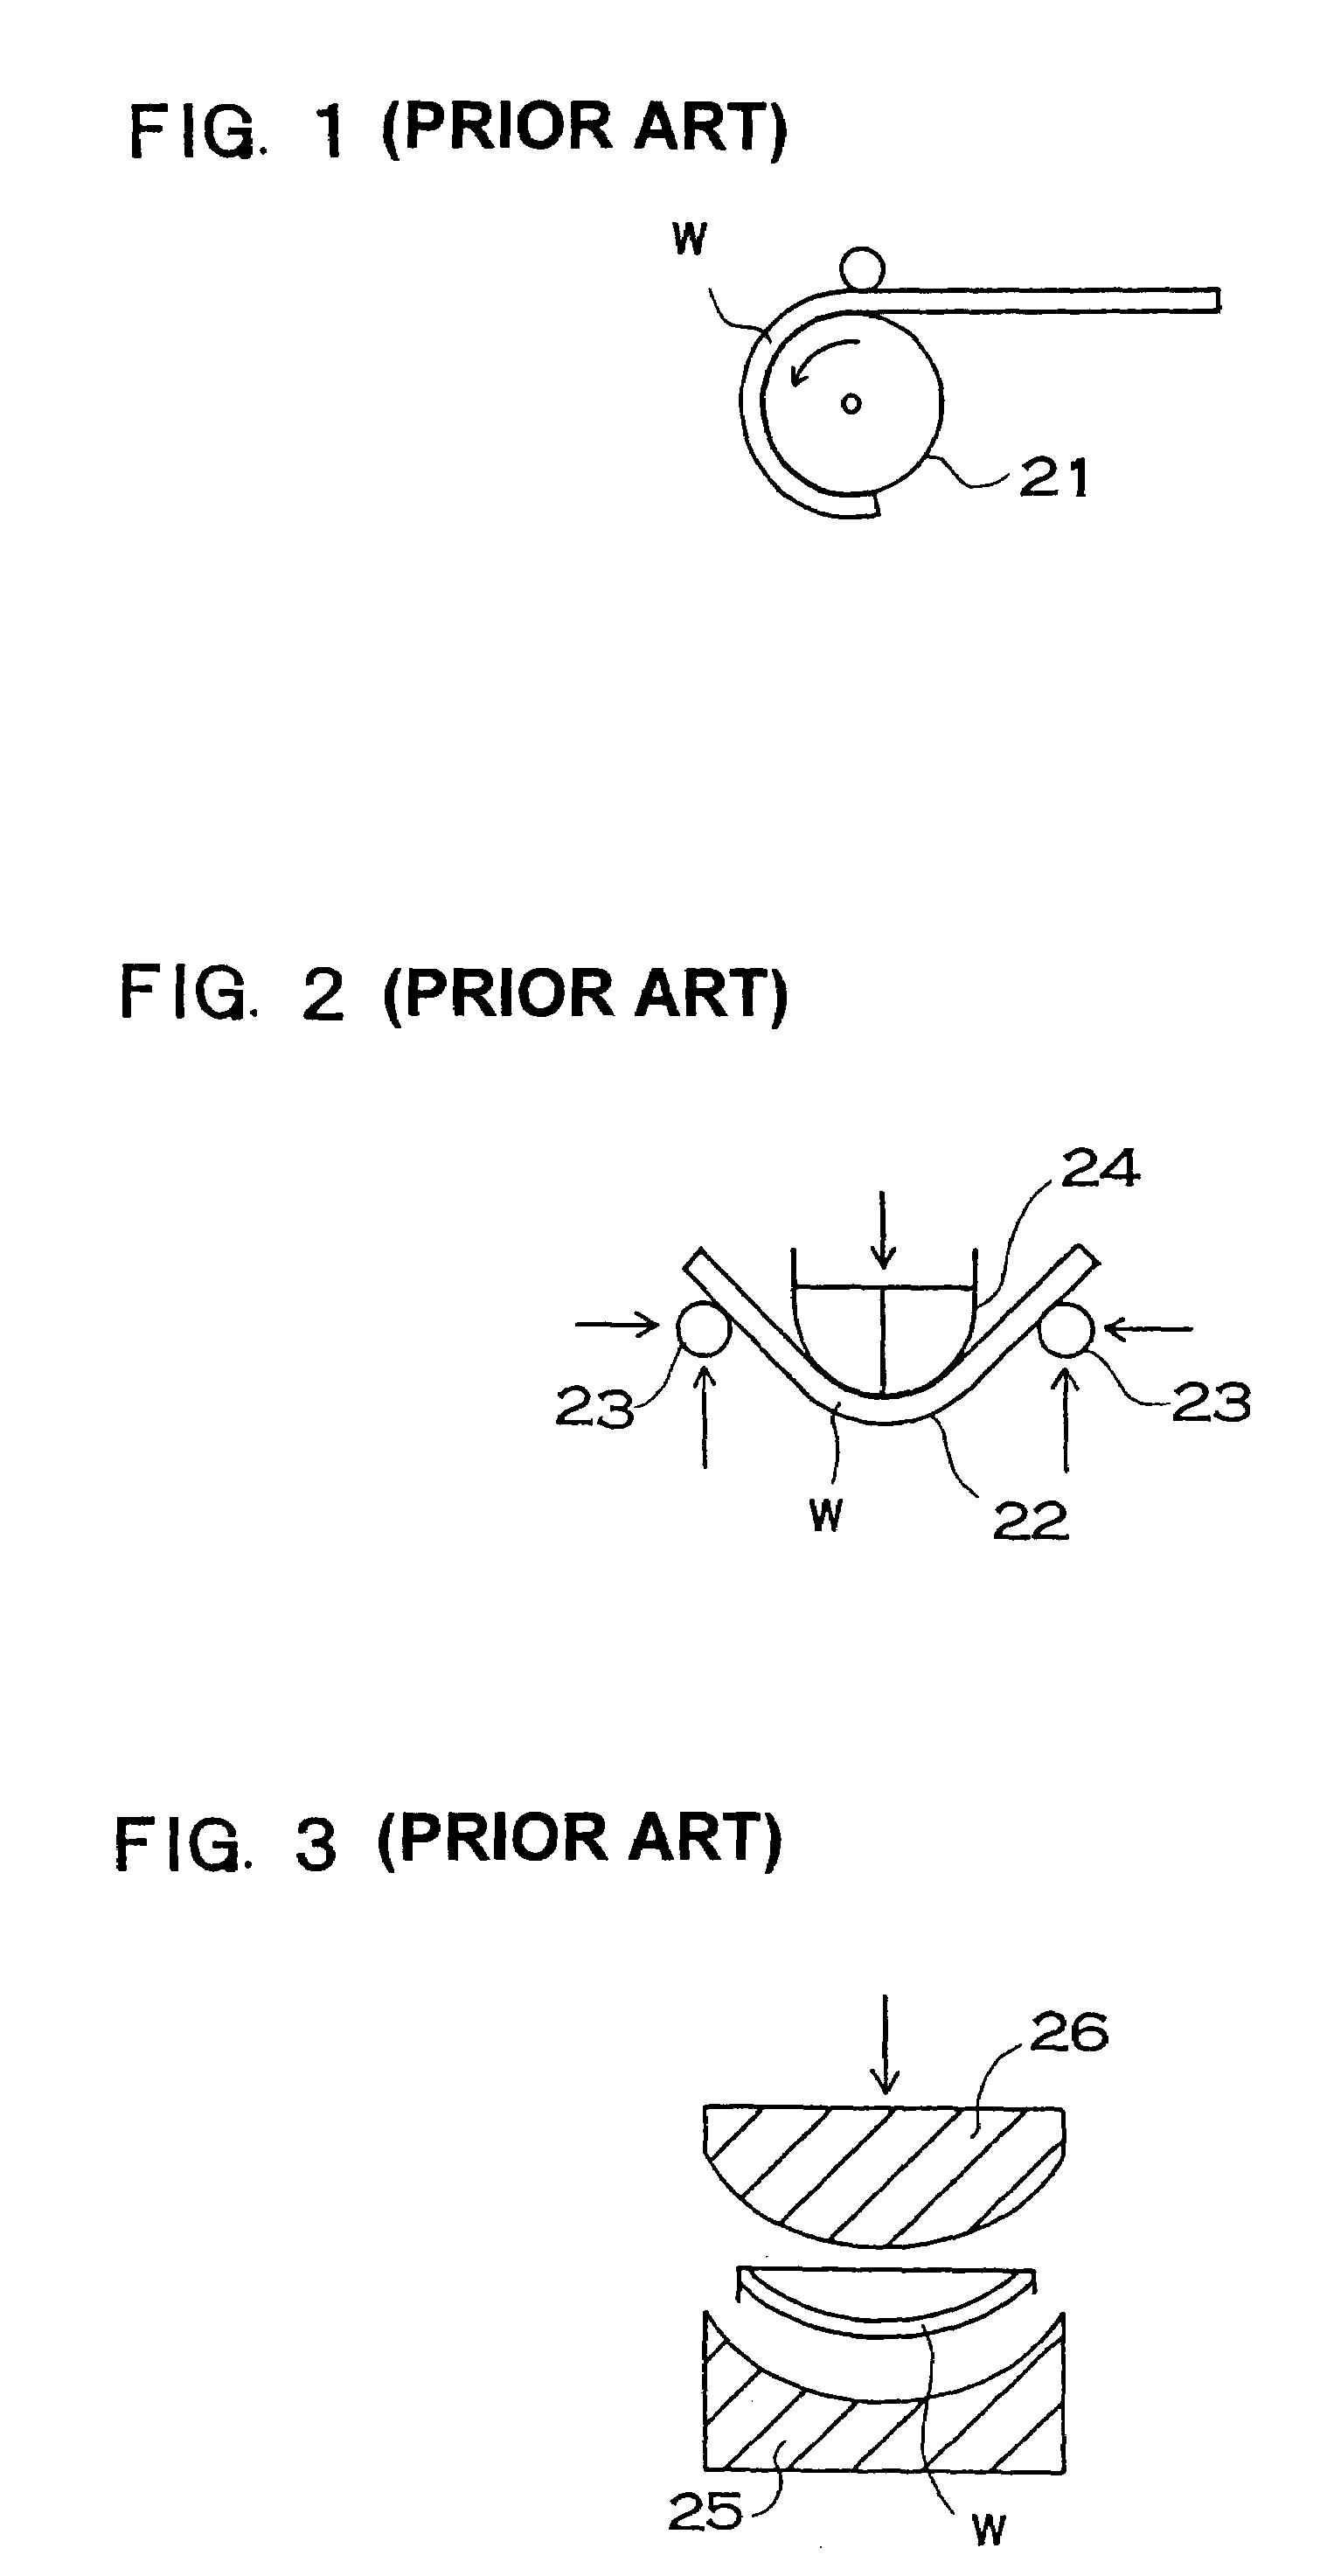 Method of bending wood materials and an apparatus for bending wood materials